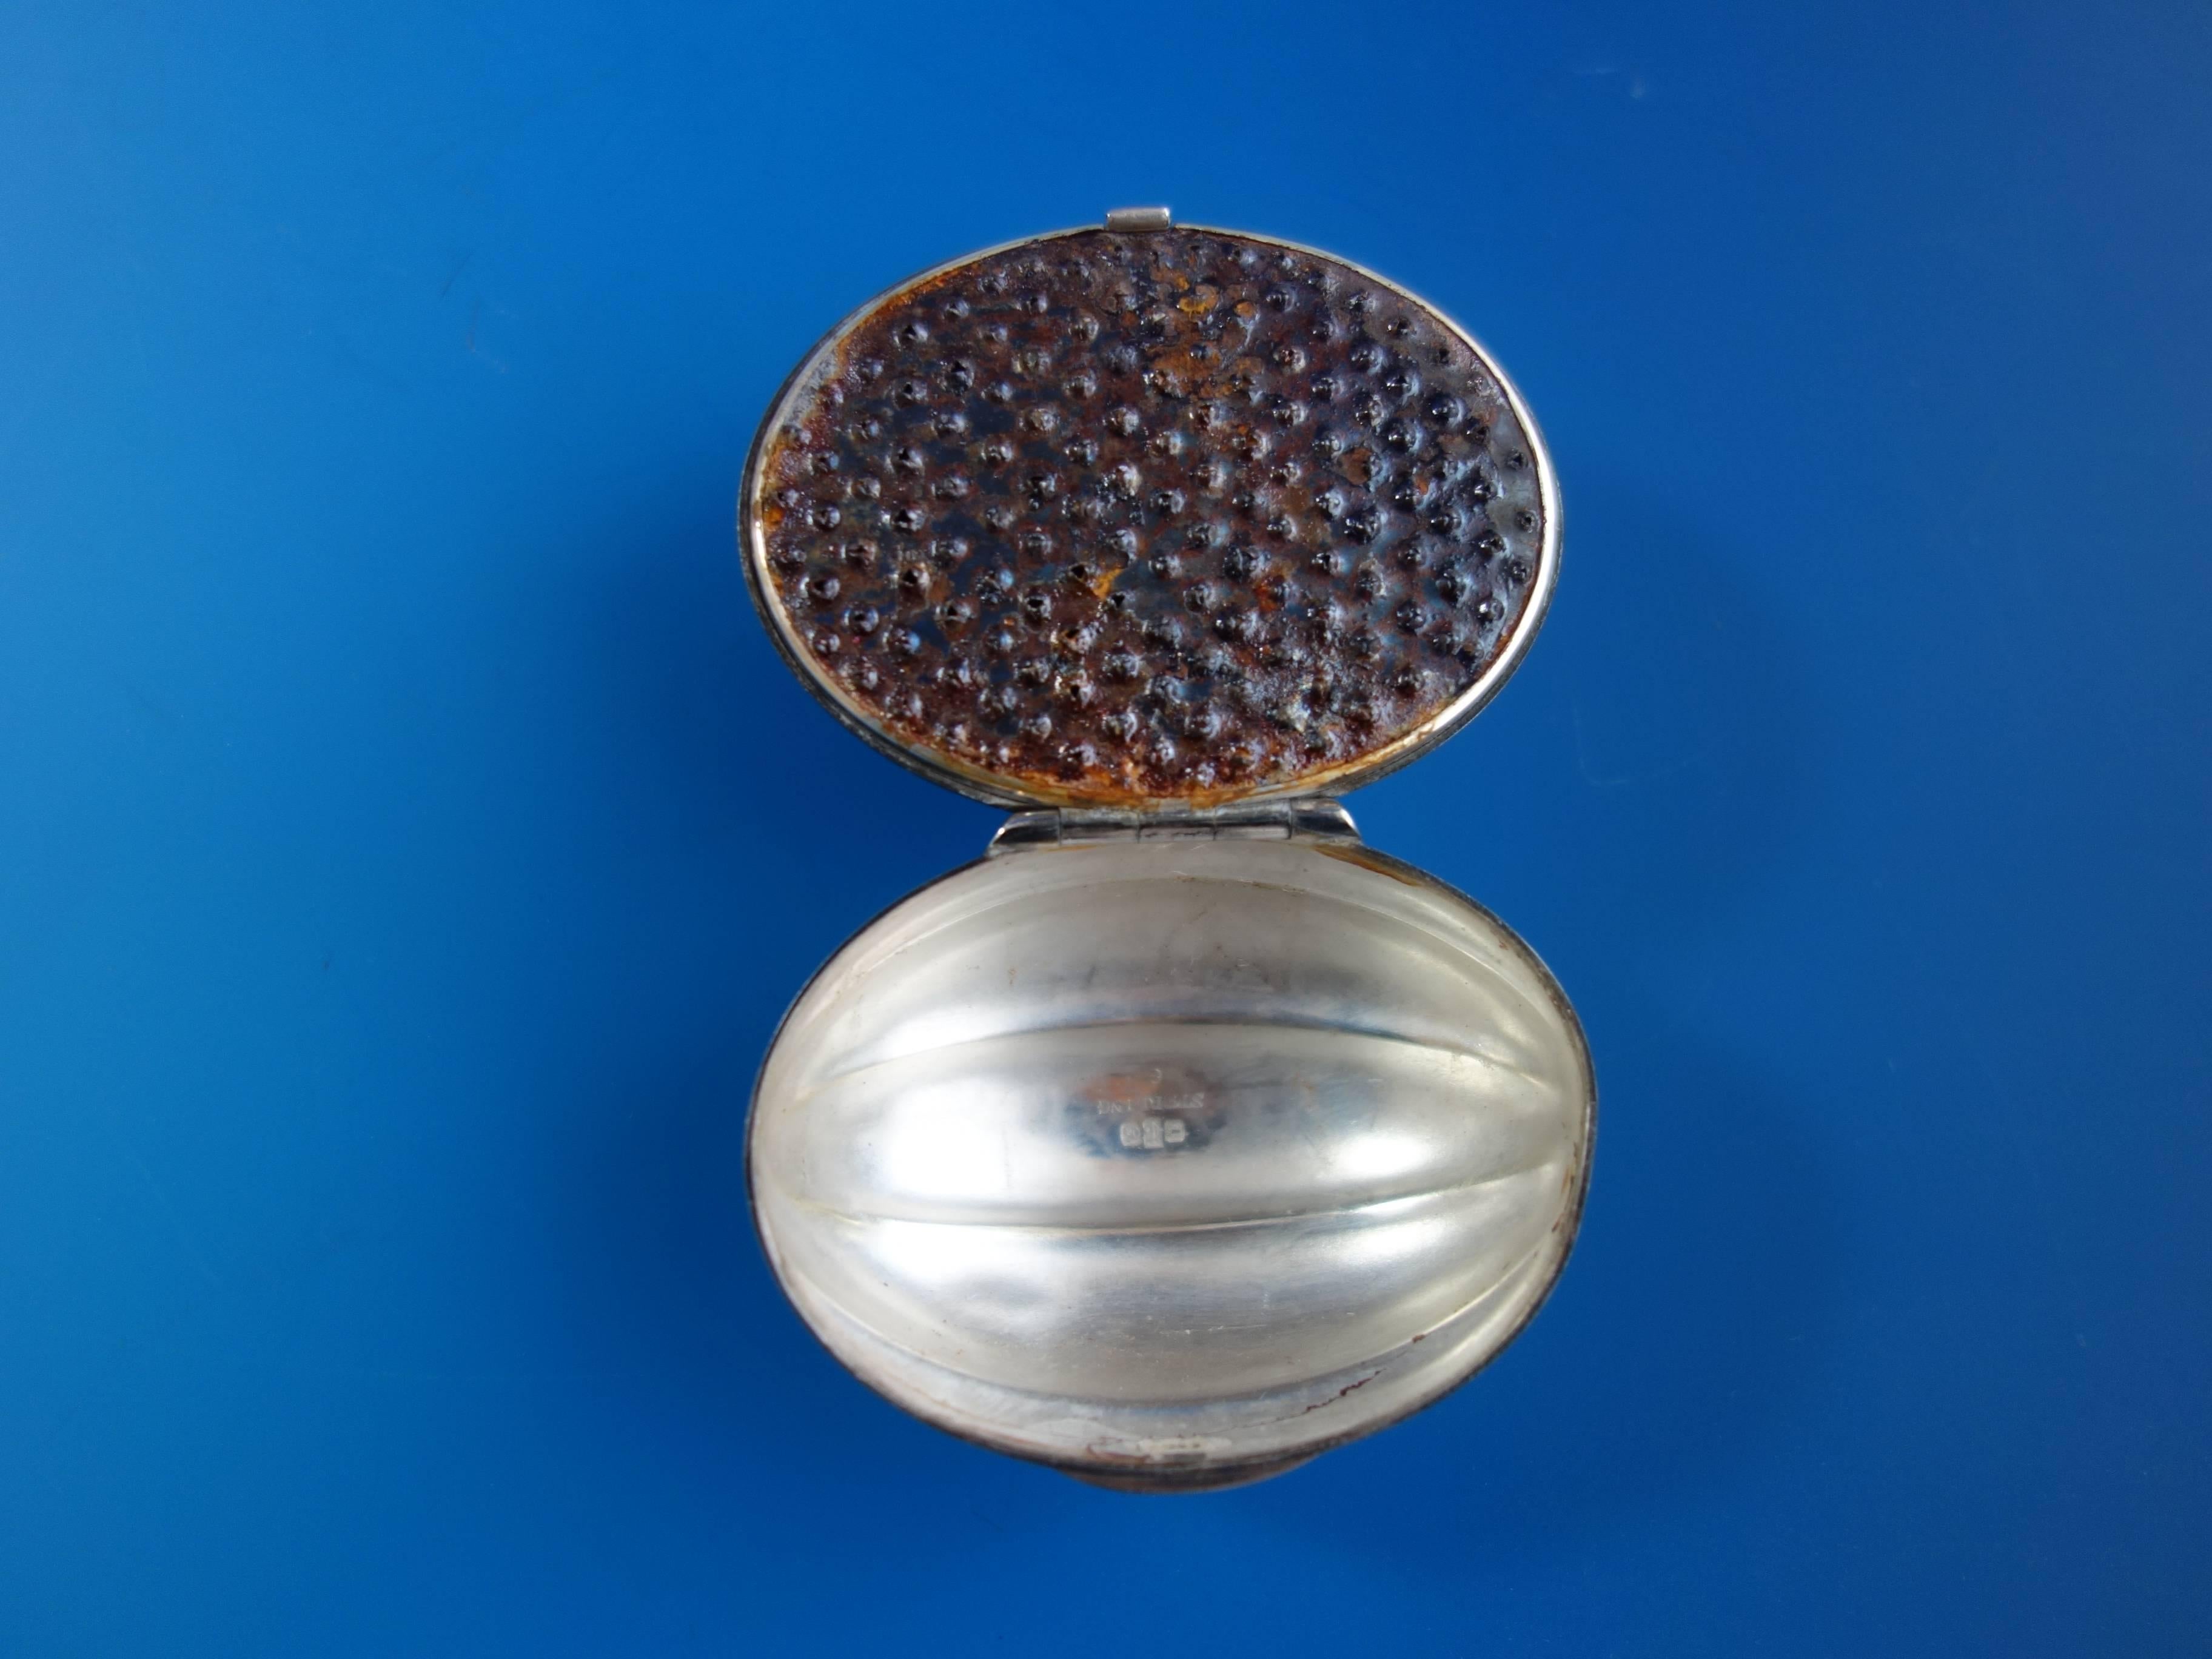 Sterling silver nutmeg grater made by Gorham in the shape of a nutshell. The piece has a 